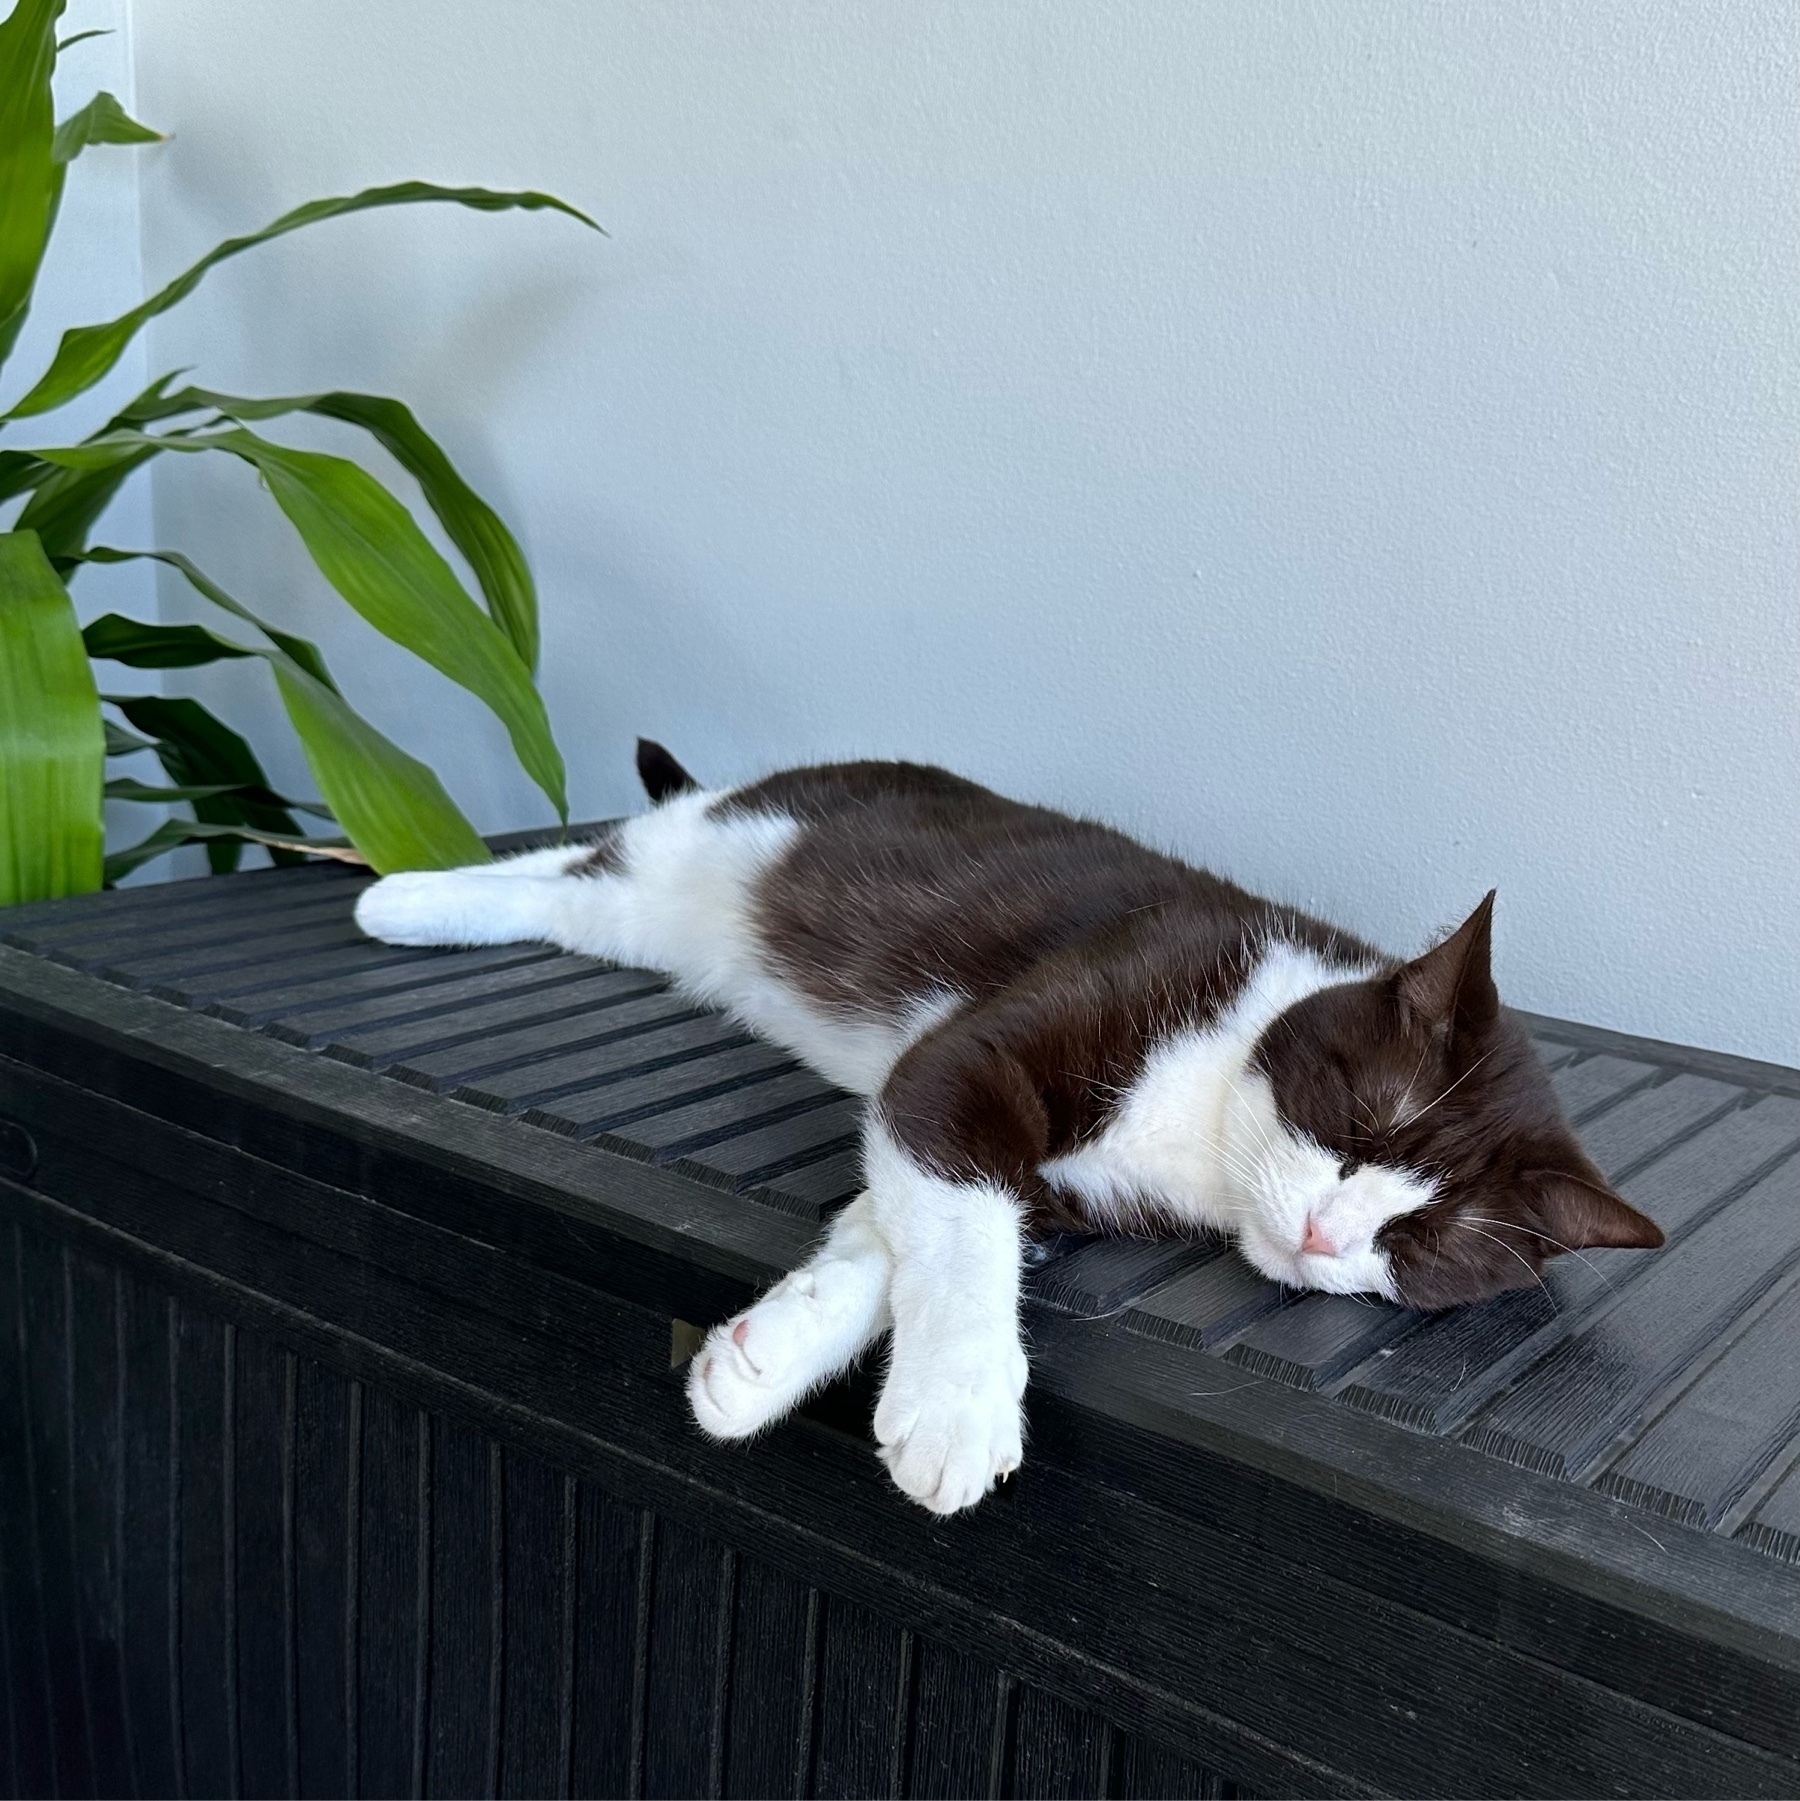 A black and white cat laying full length asleep on a black box. Her body is black but belly and face are white as are the lower half of her legs. The two front paws are crossed and hanging over the edge of the box.